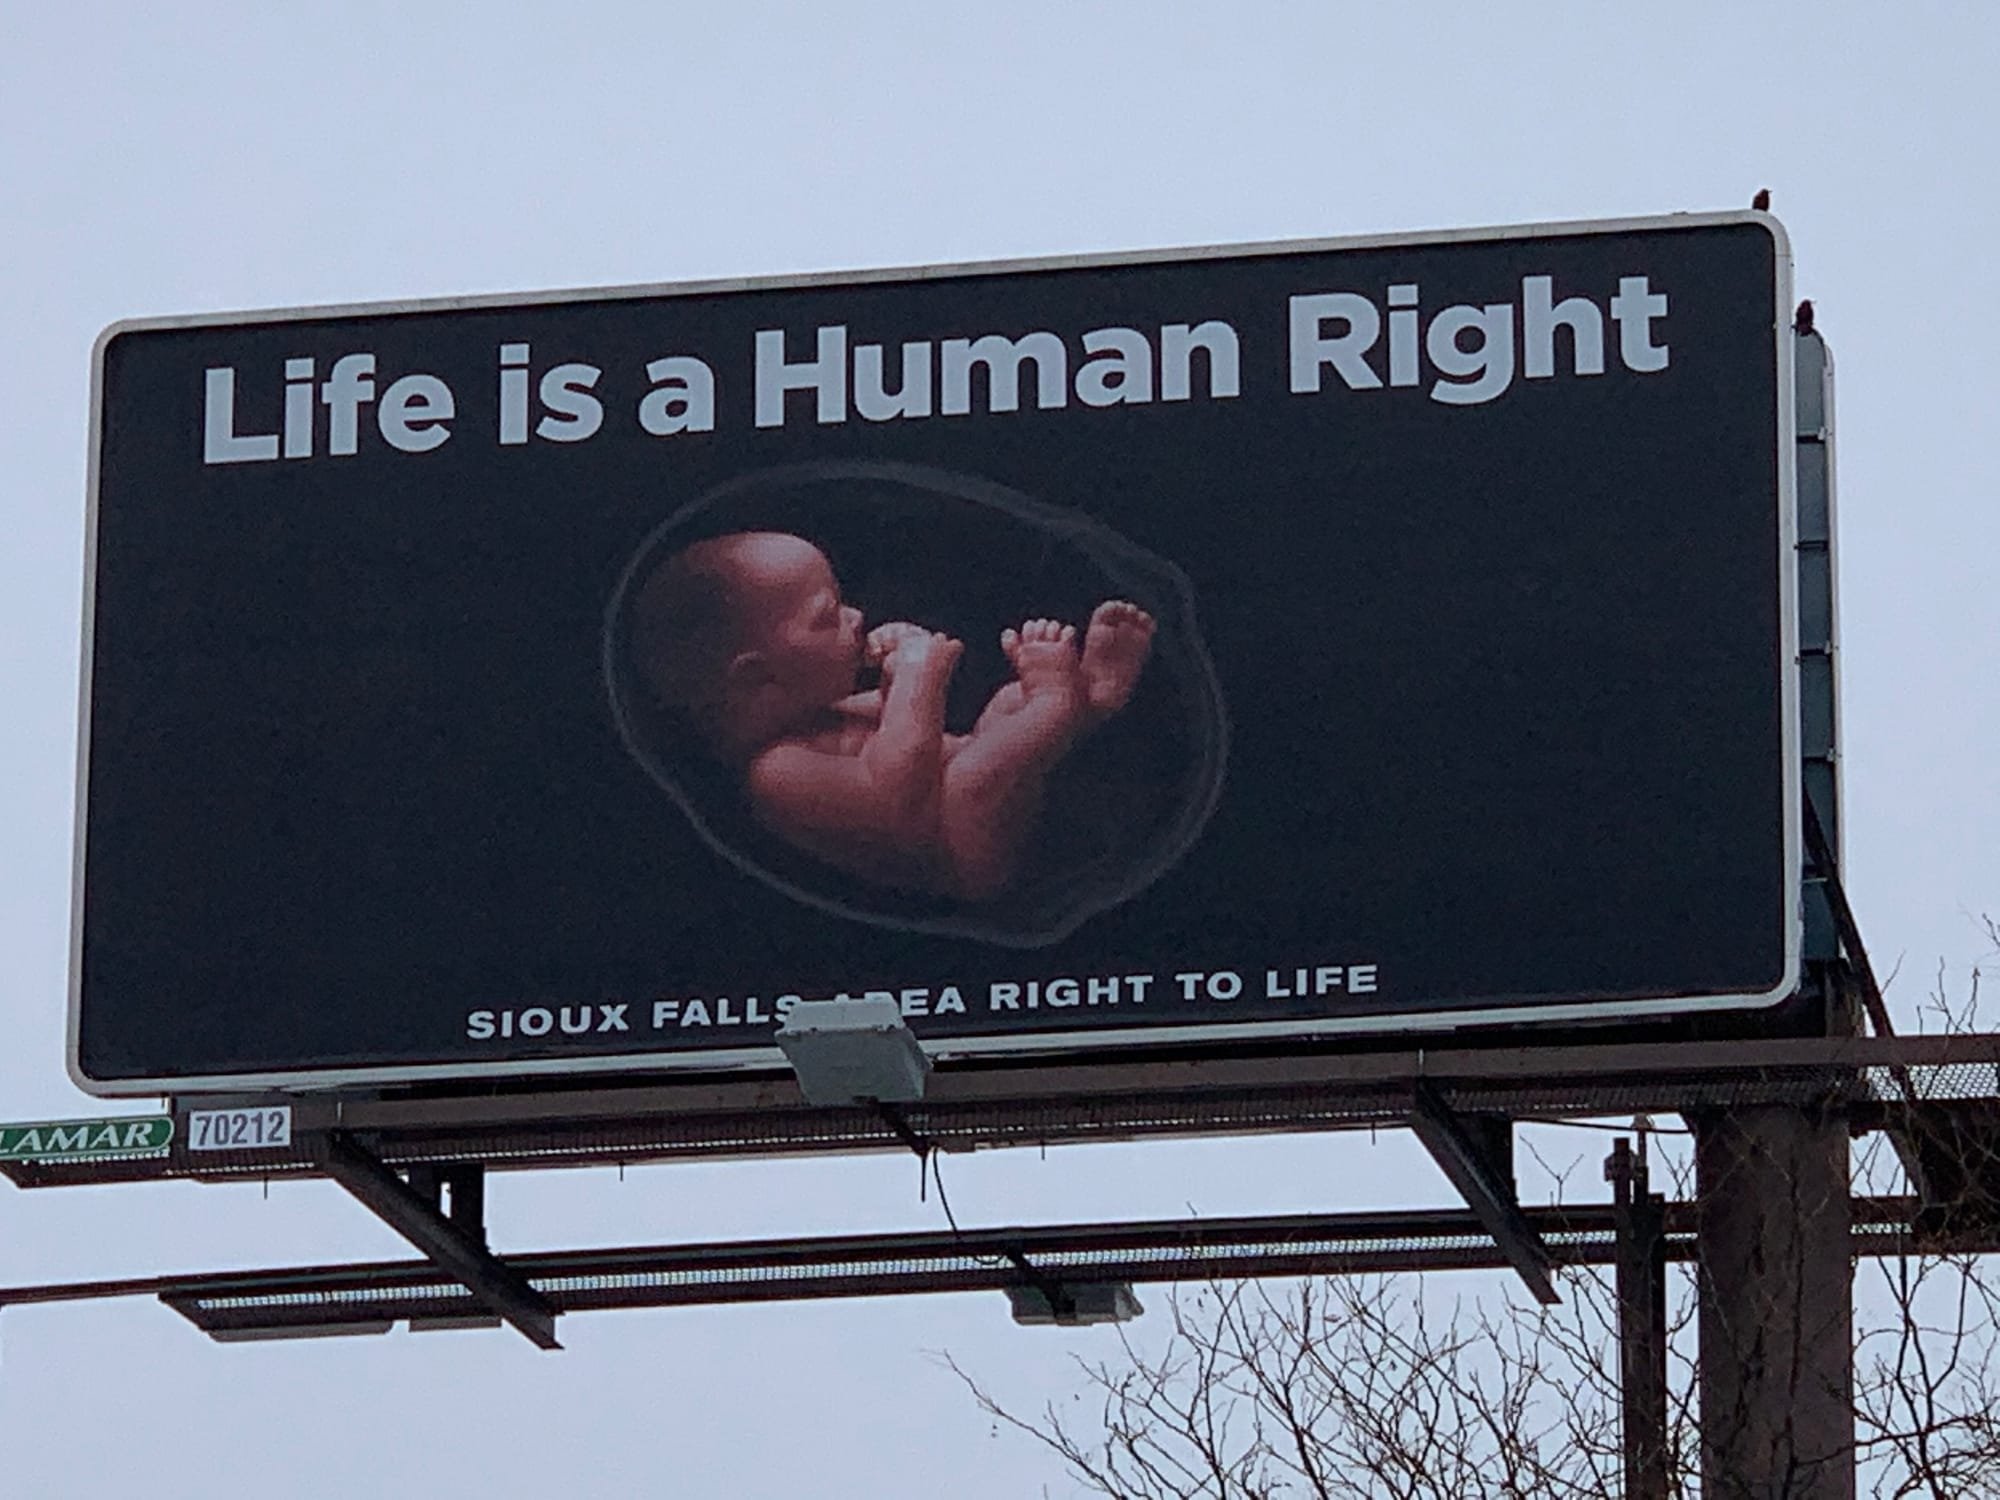 Life is a Human Right - W 10th St and I-229 Sioux FAlls